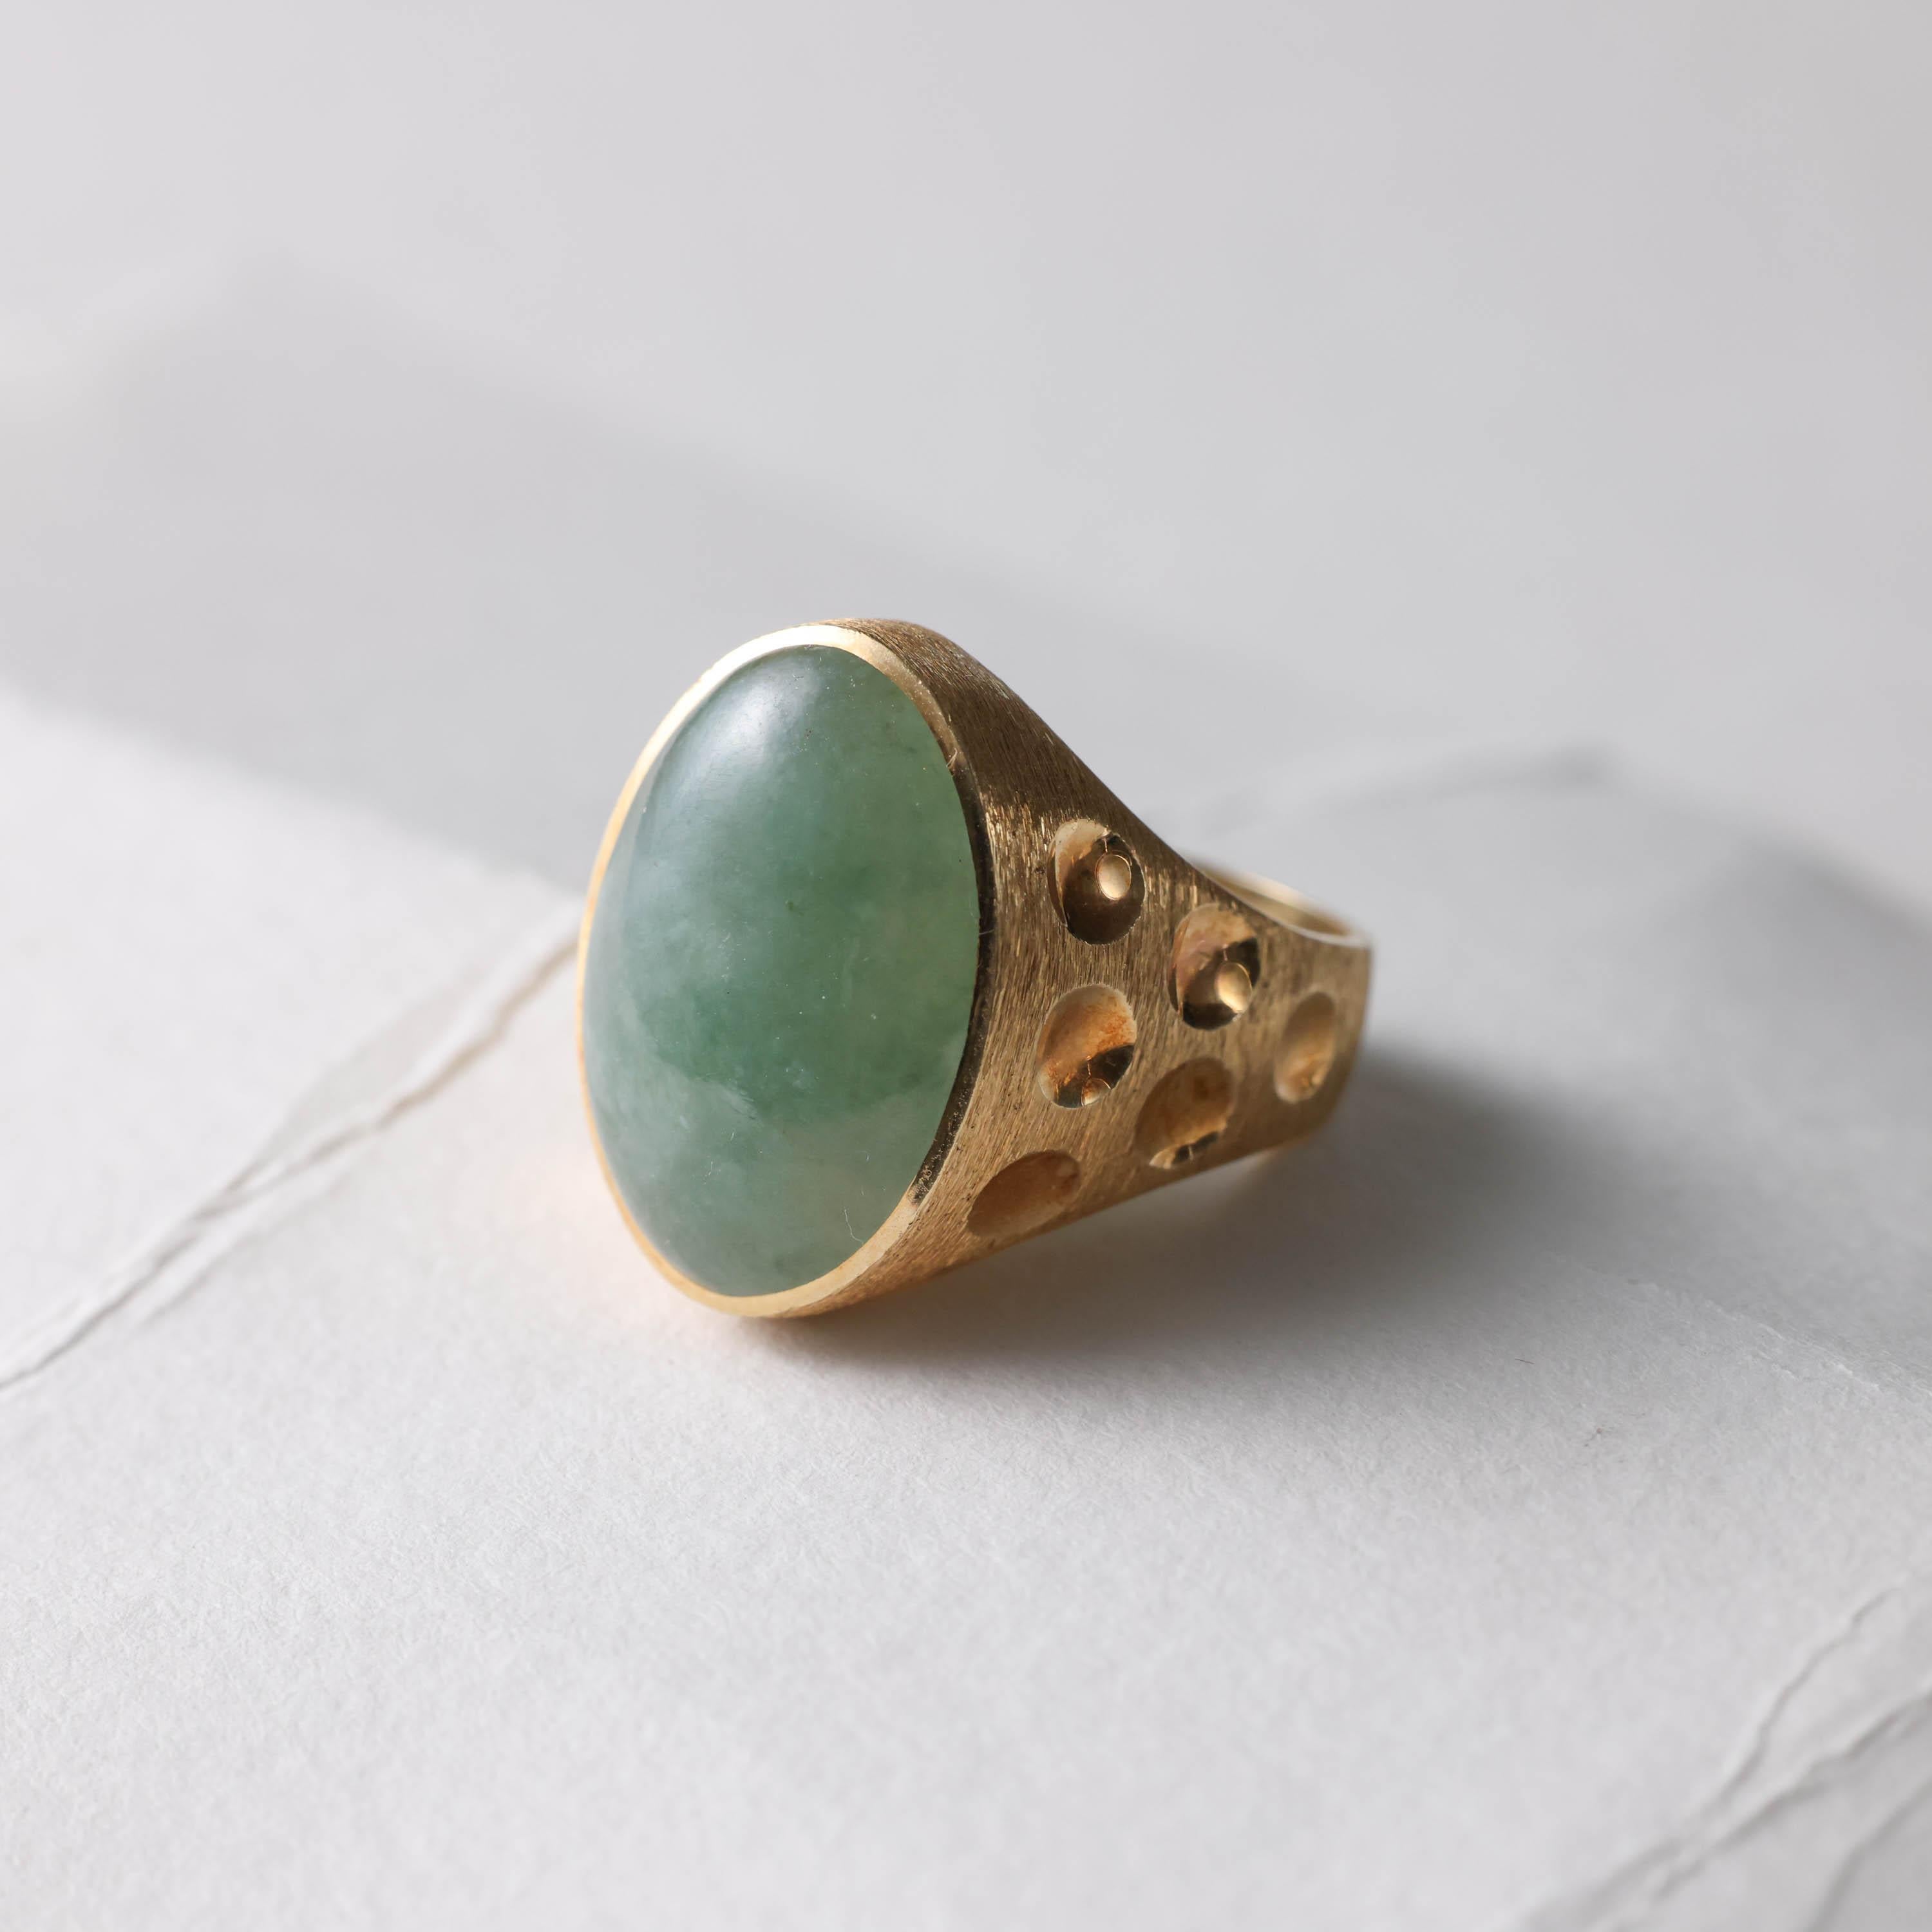 Cabochon Midcentury Jadeite Men's Ring Certified Untreated, Eccentric Lux Quality For Sale